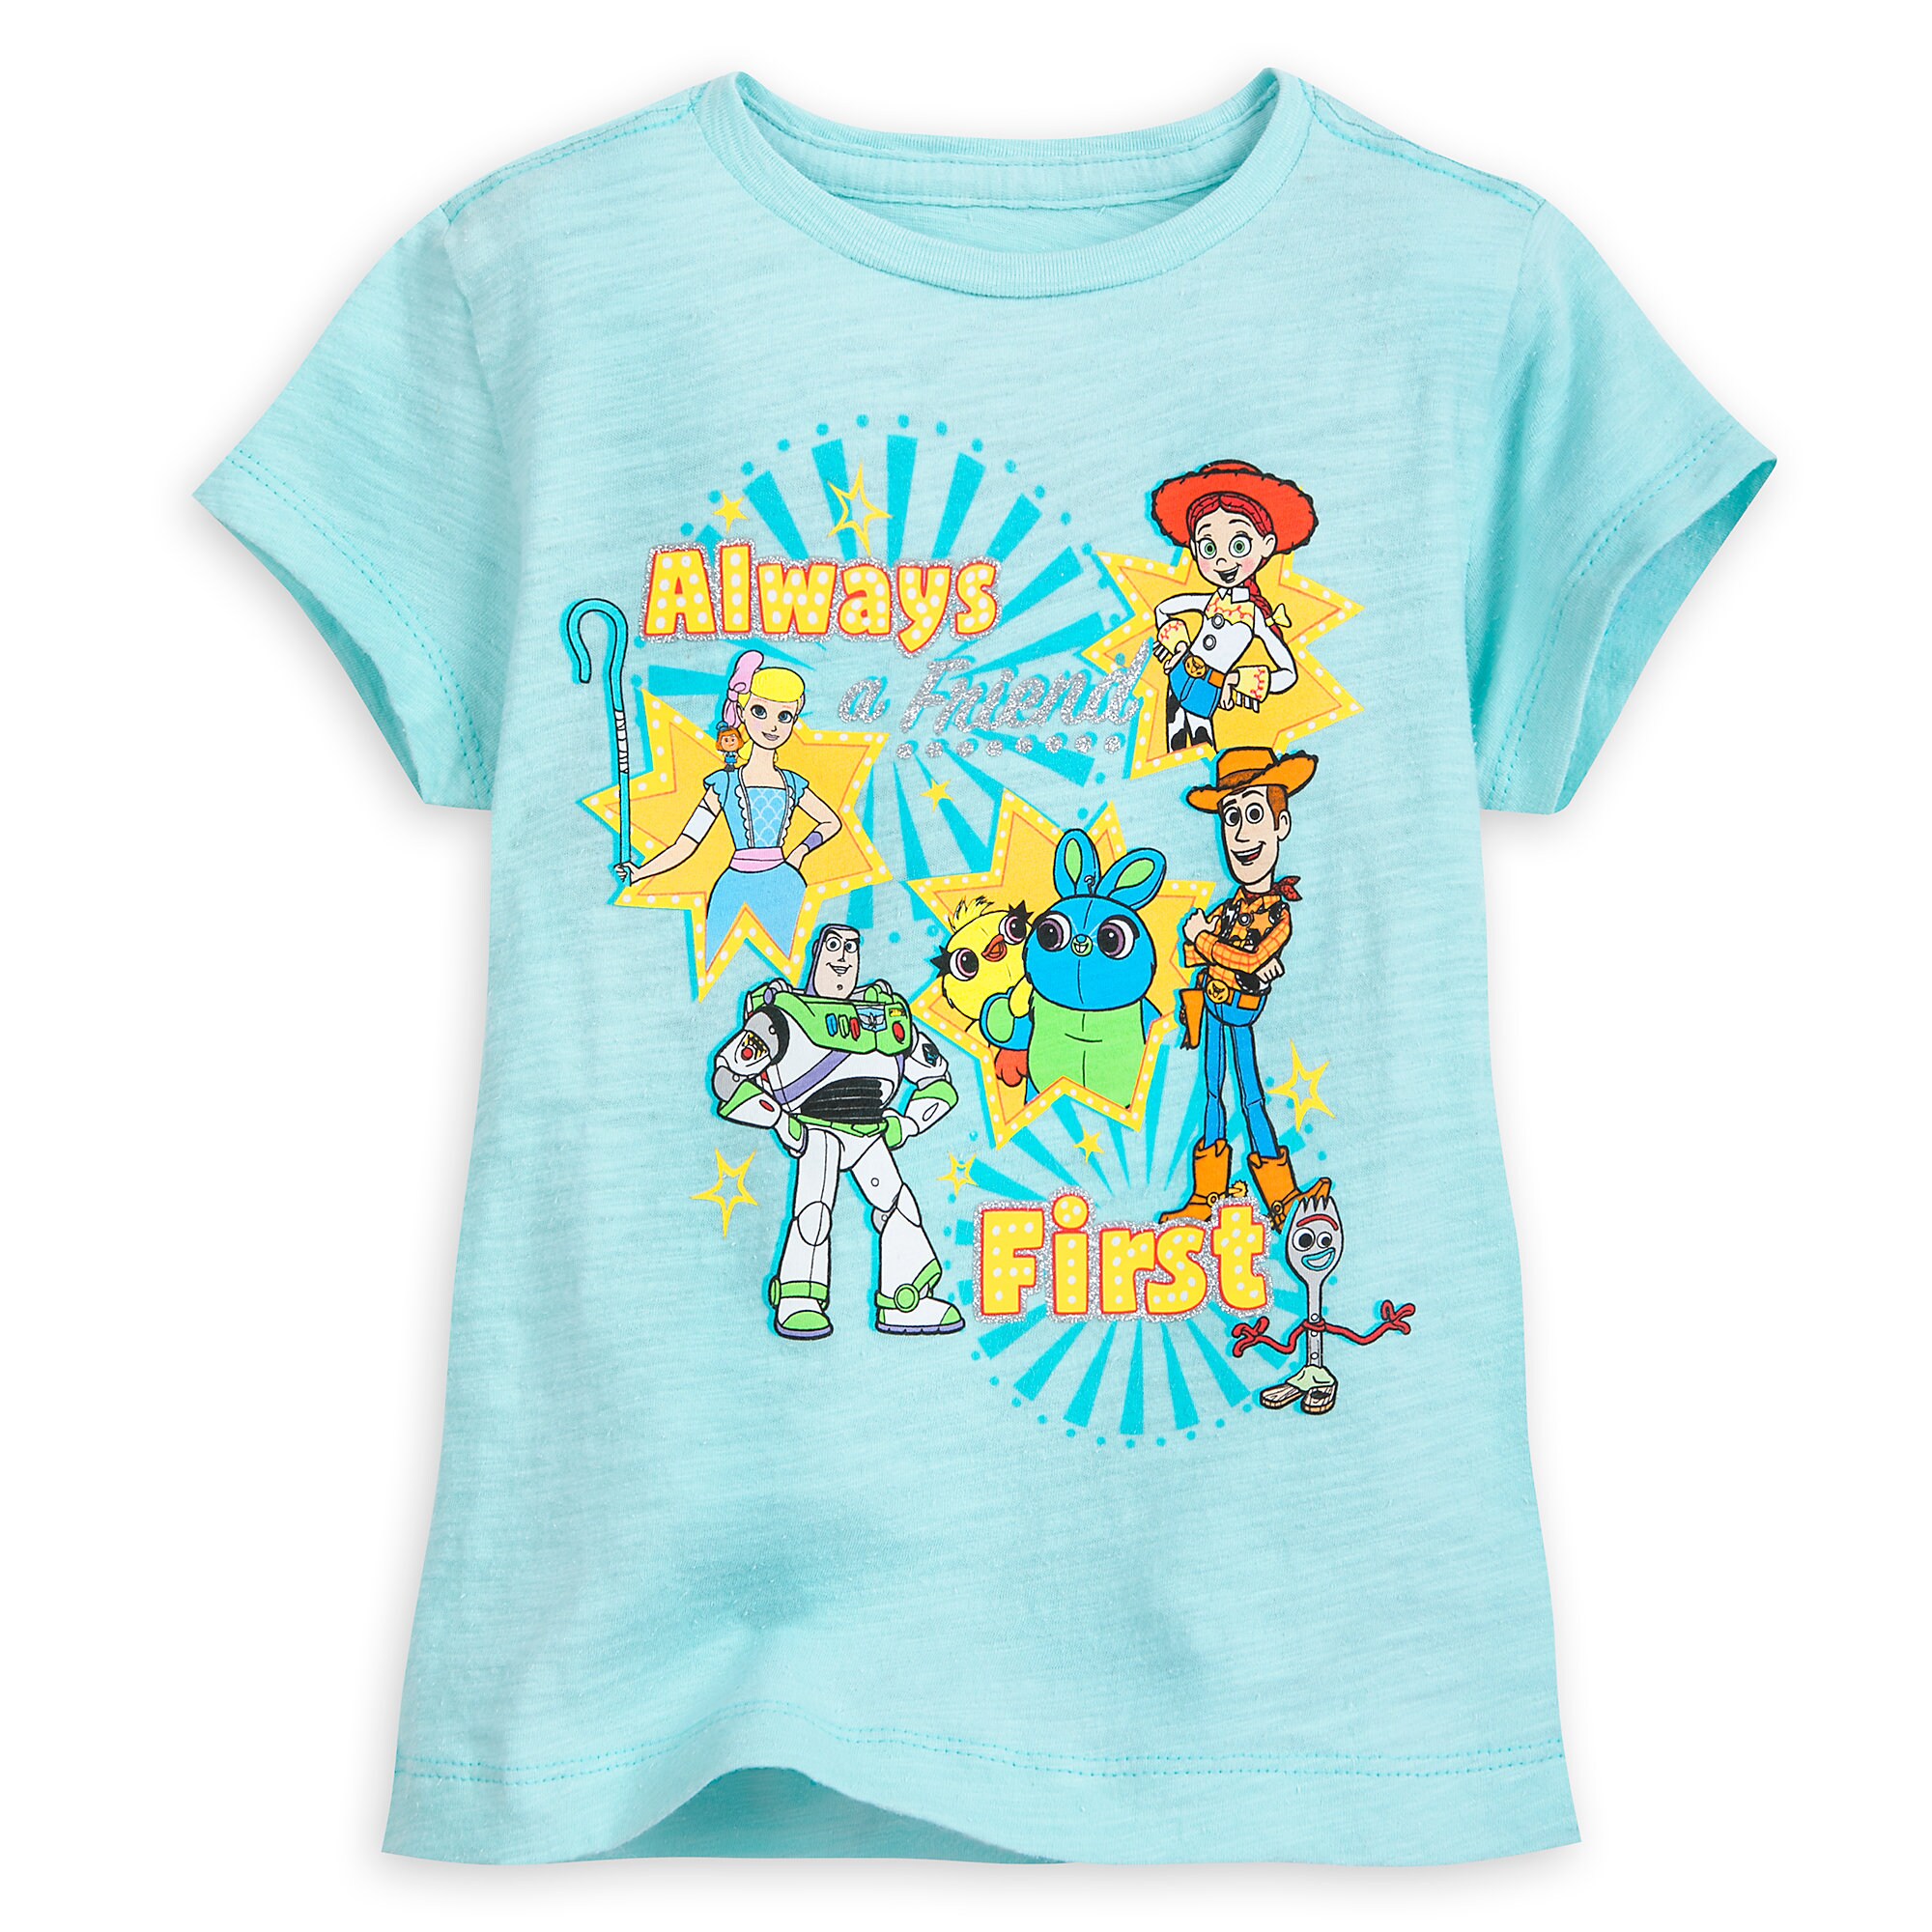 Toy Story 4 T-Shirt for Girls